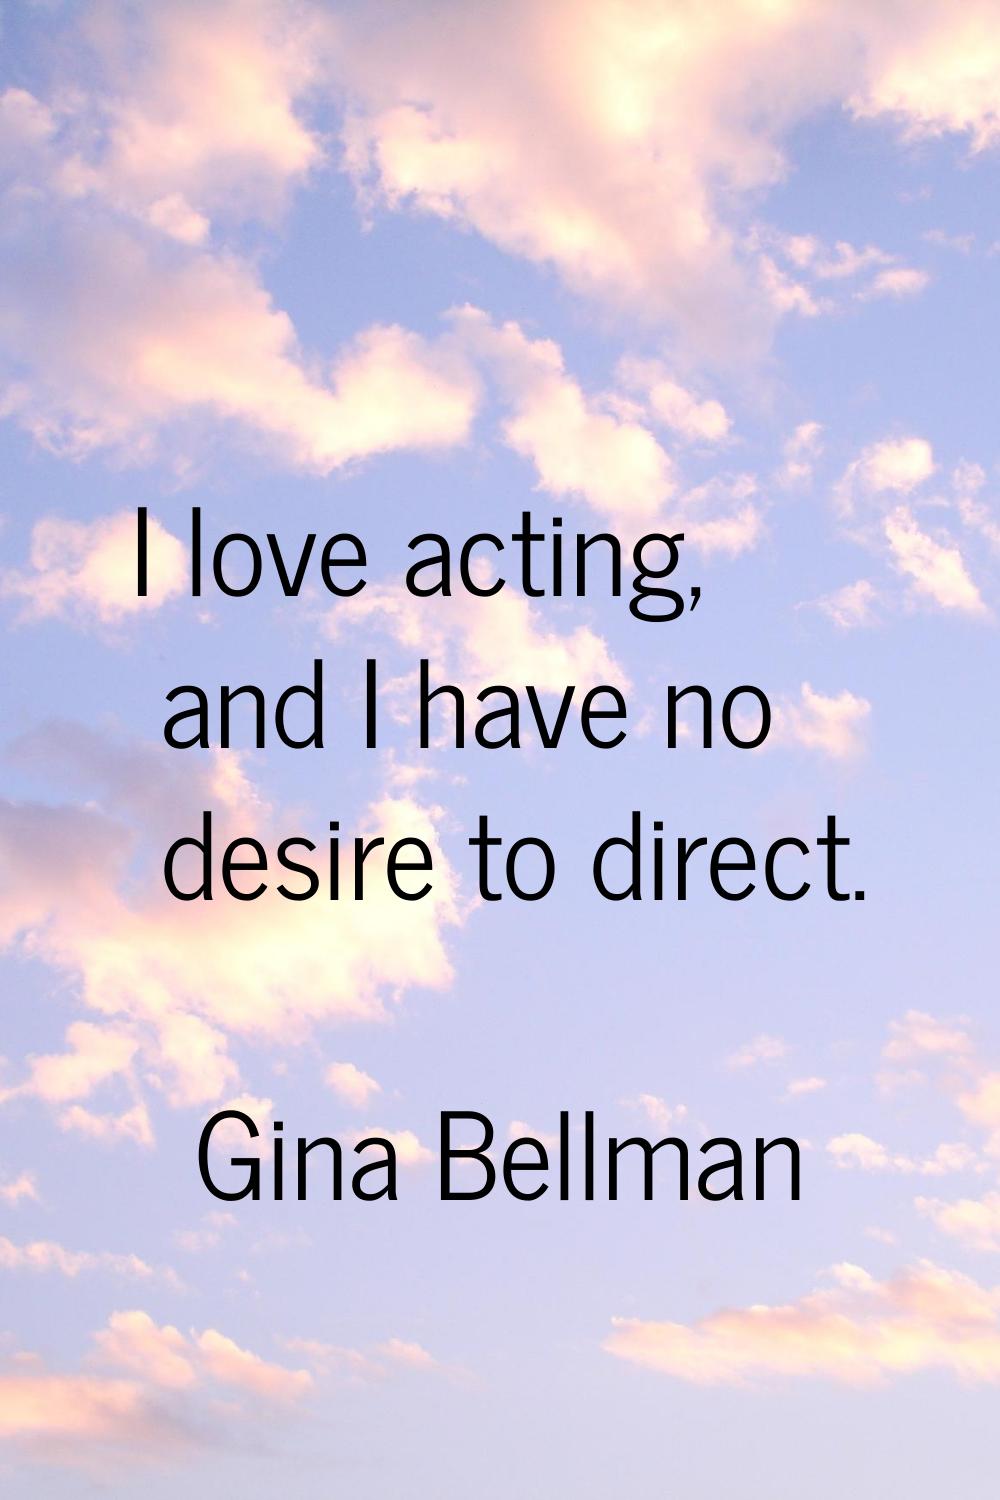 I love acting, and I have no desire to direct.